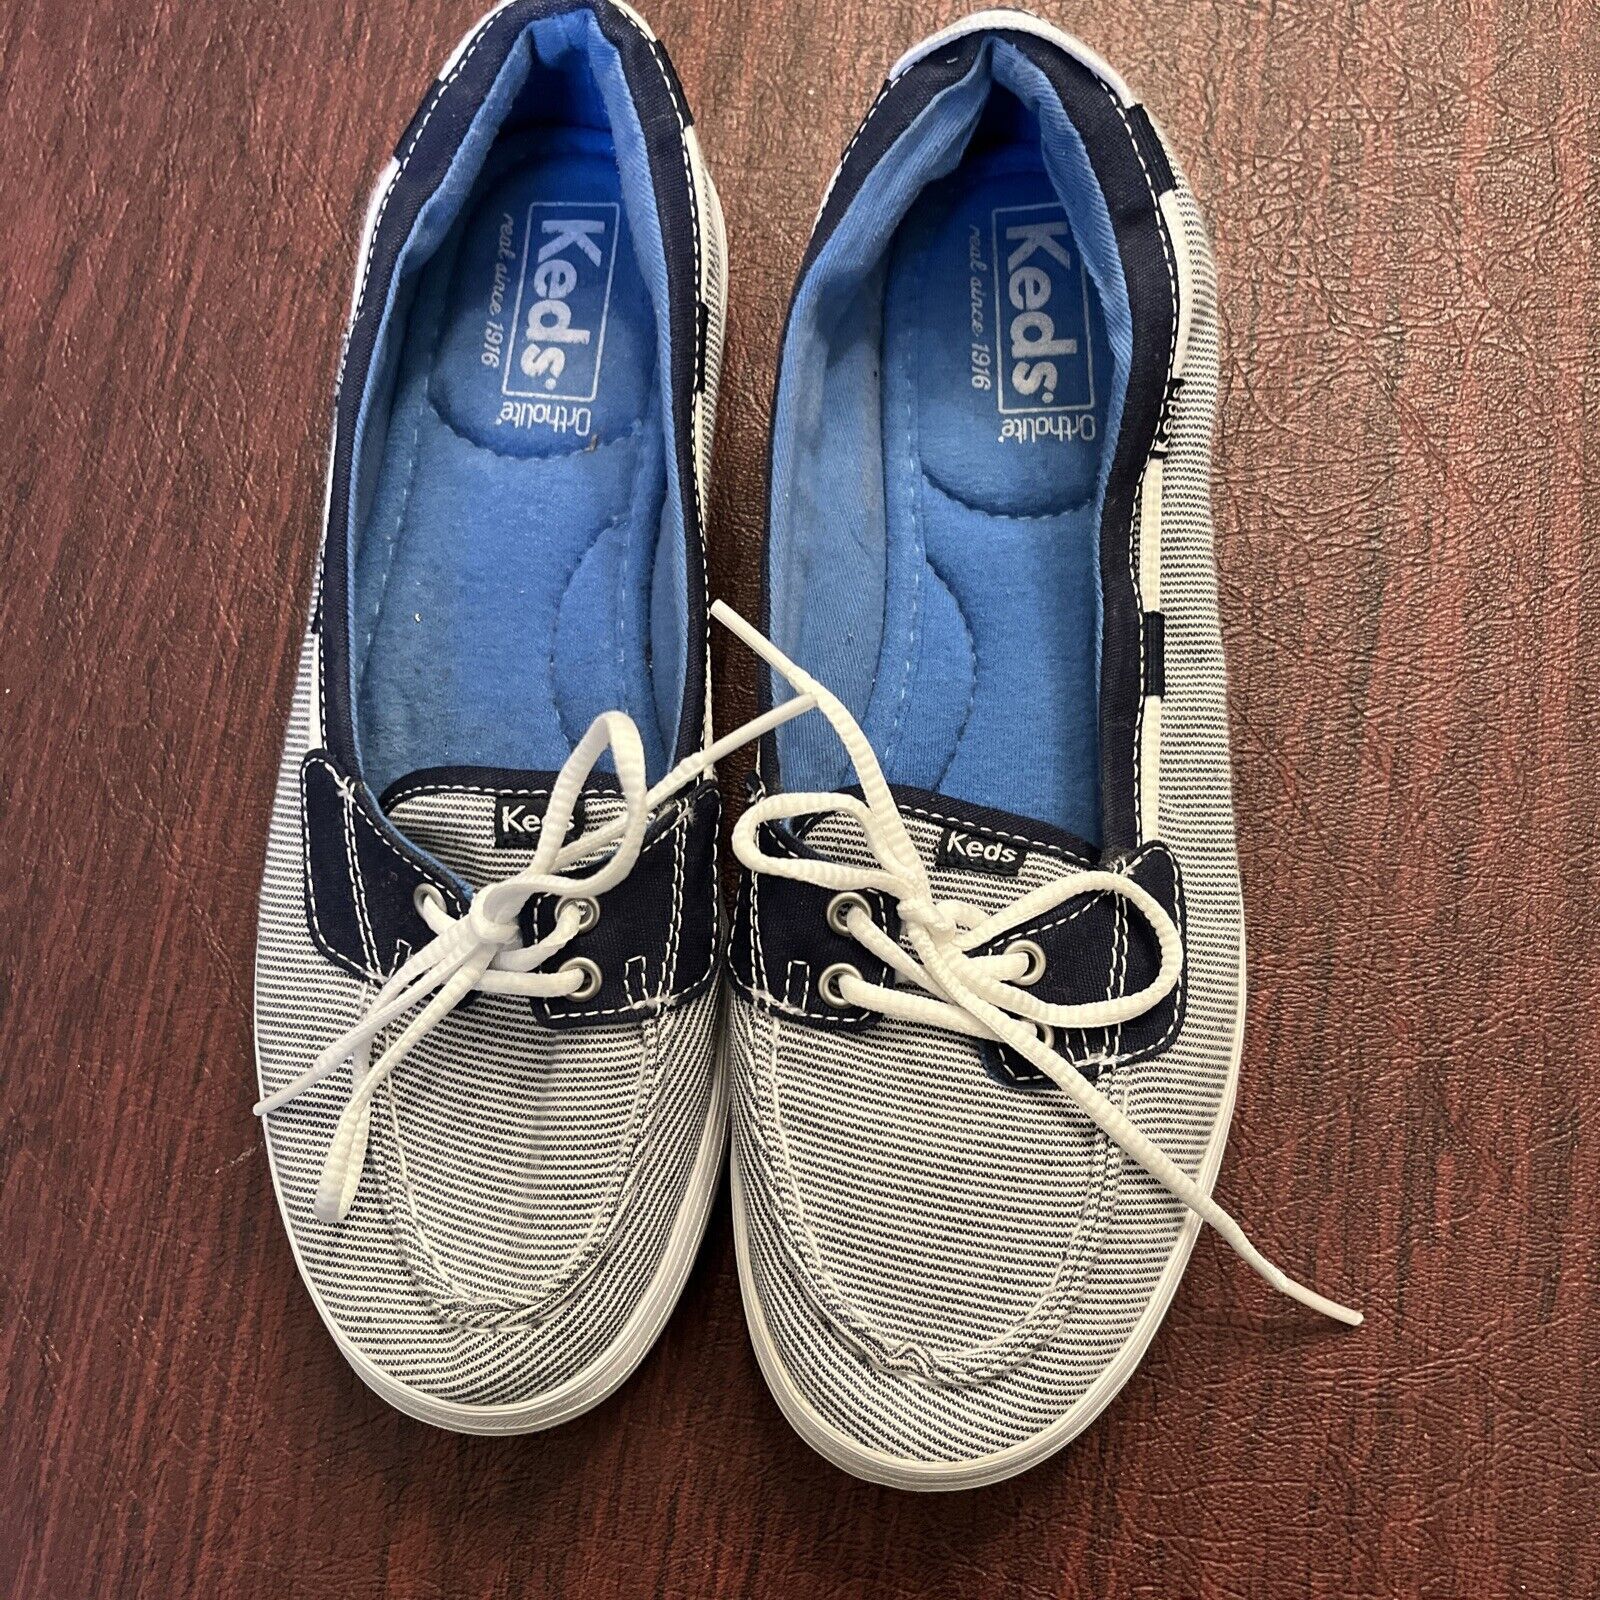 Primary image for Womens Keds Blue and White Slip On  Sneakers Shoes US Size 8